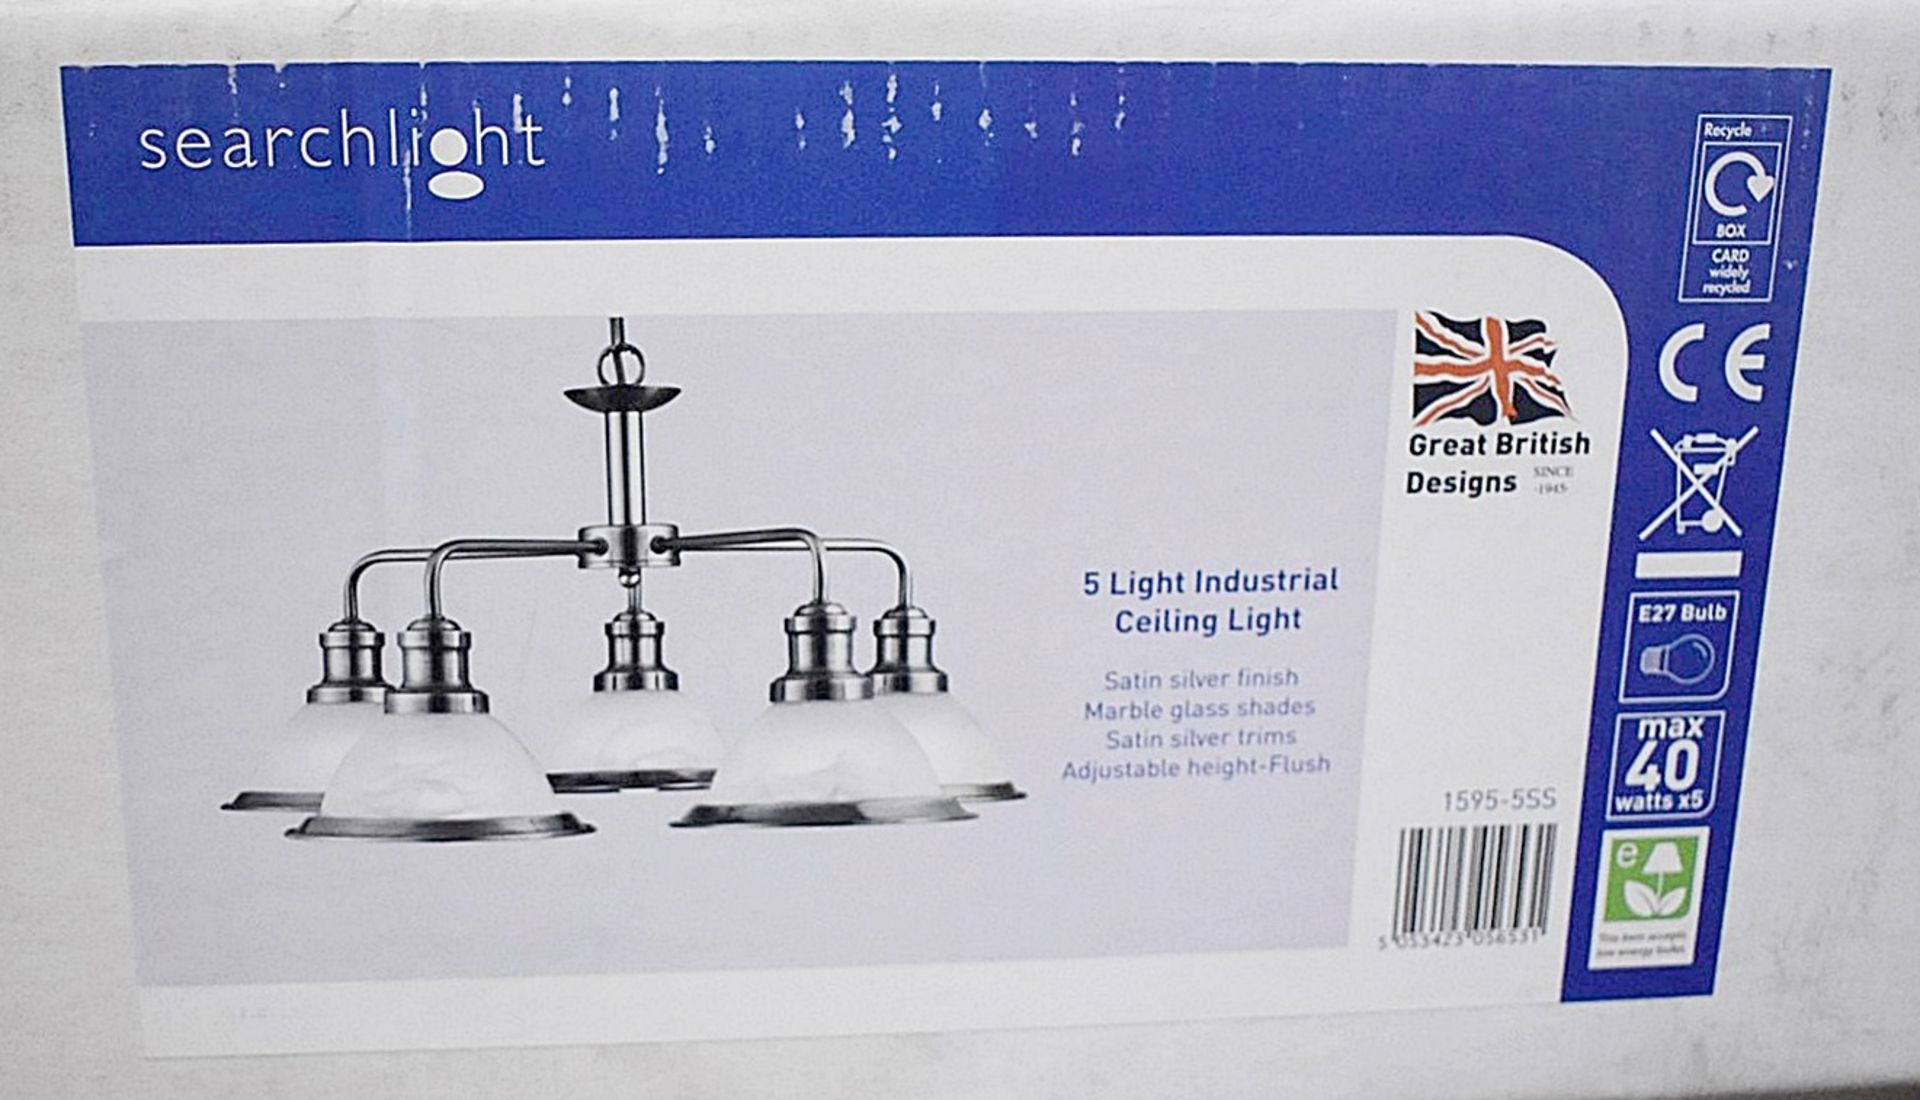 1 x Searchlight Bistro 5 Light Ceiling Pendant Light Satin Silver - New Boxed Stock - 1595-5SS/PalH - Image 2 of 2